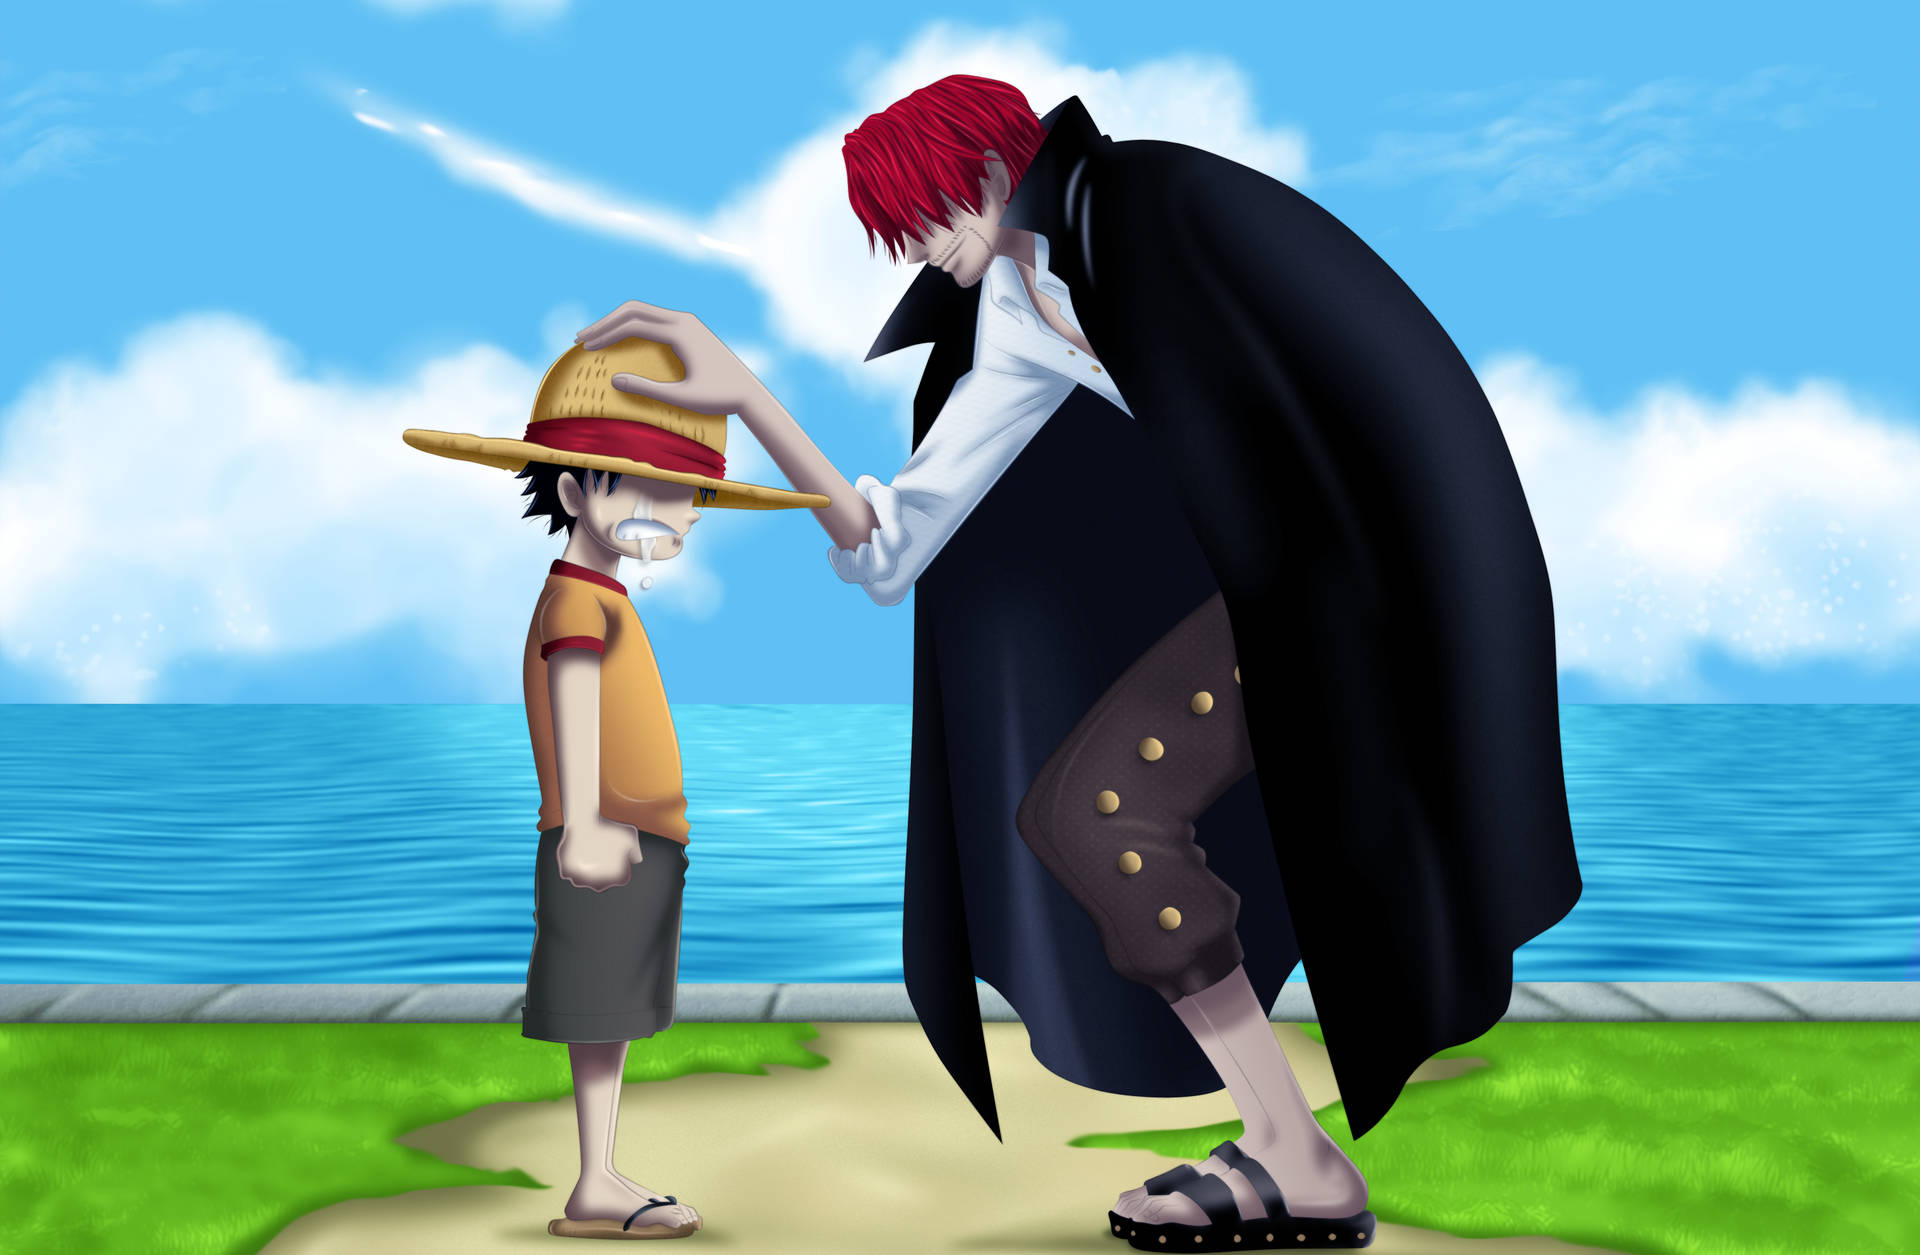 Shanks, Luffy and Ace - Red Hair Shanks wallpaper (36832797) - fanpop -  Page 4